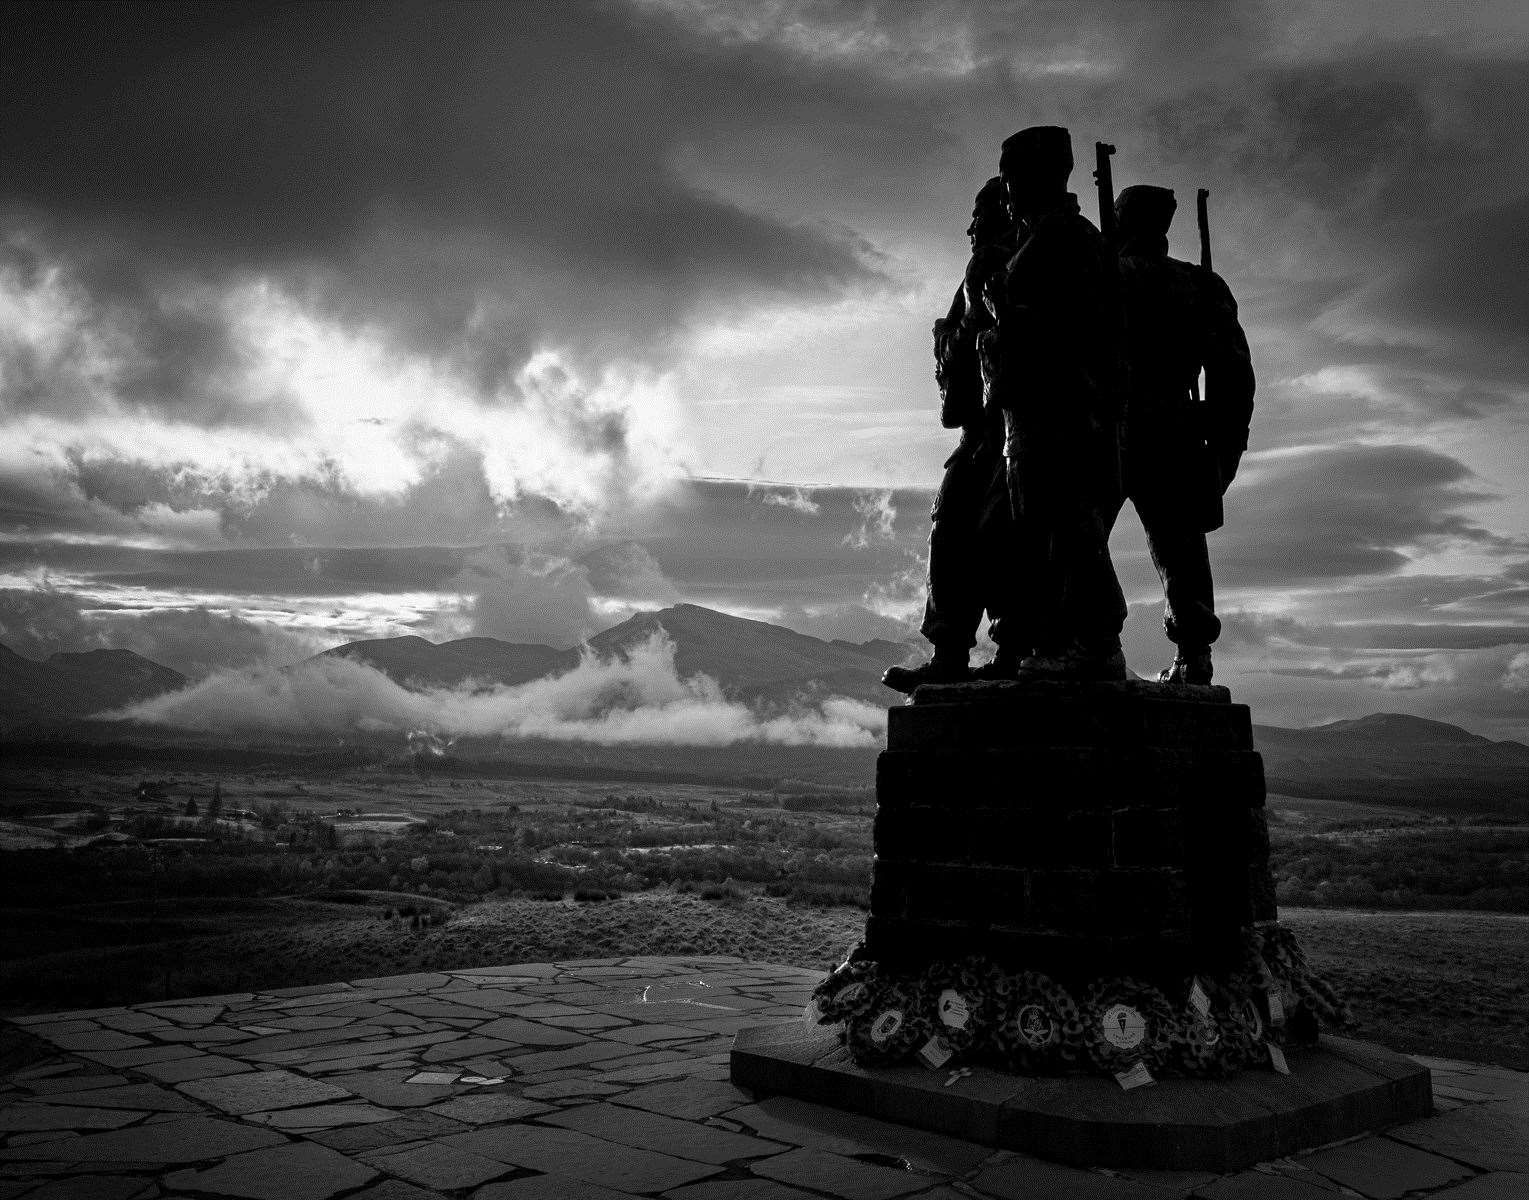 An emotive picture of the Commando War Memorial at Spean Bridge won Andy Kirby second place in the monochrome category.